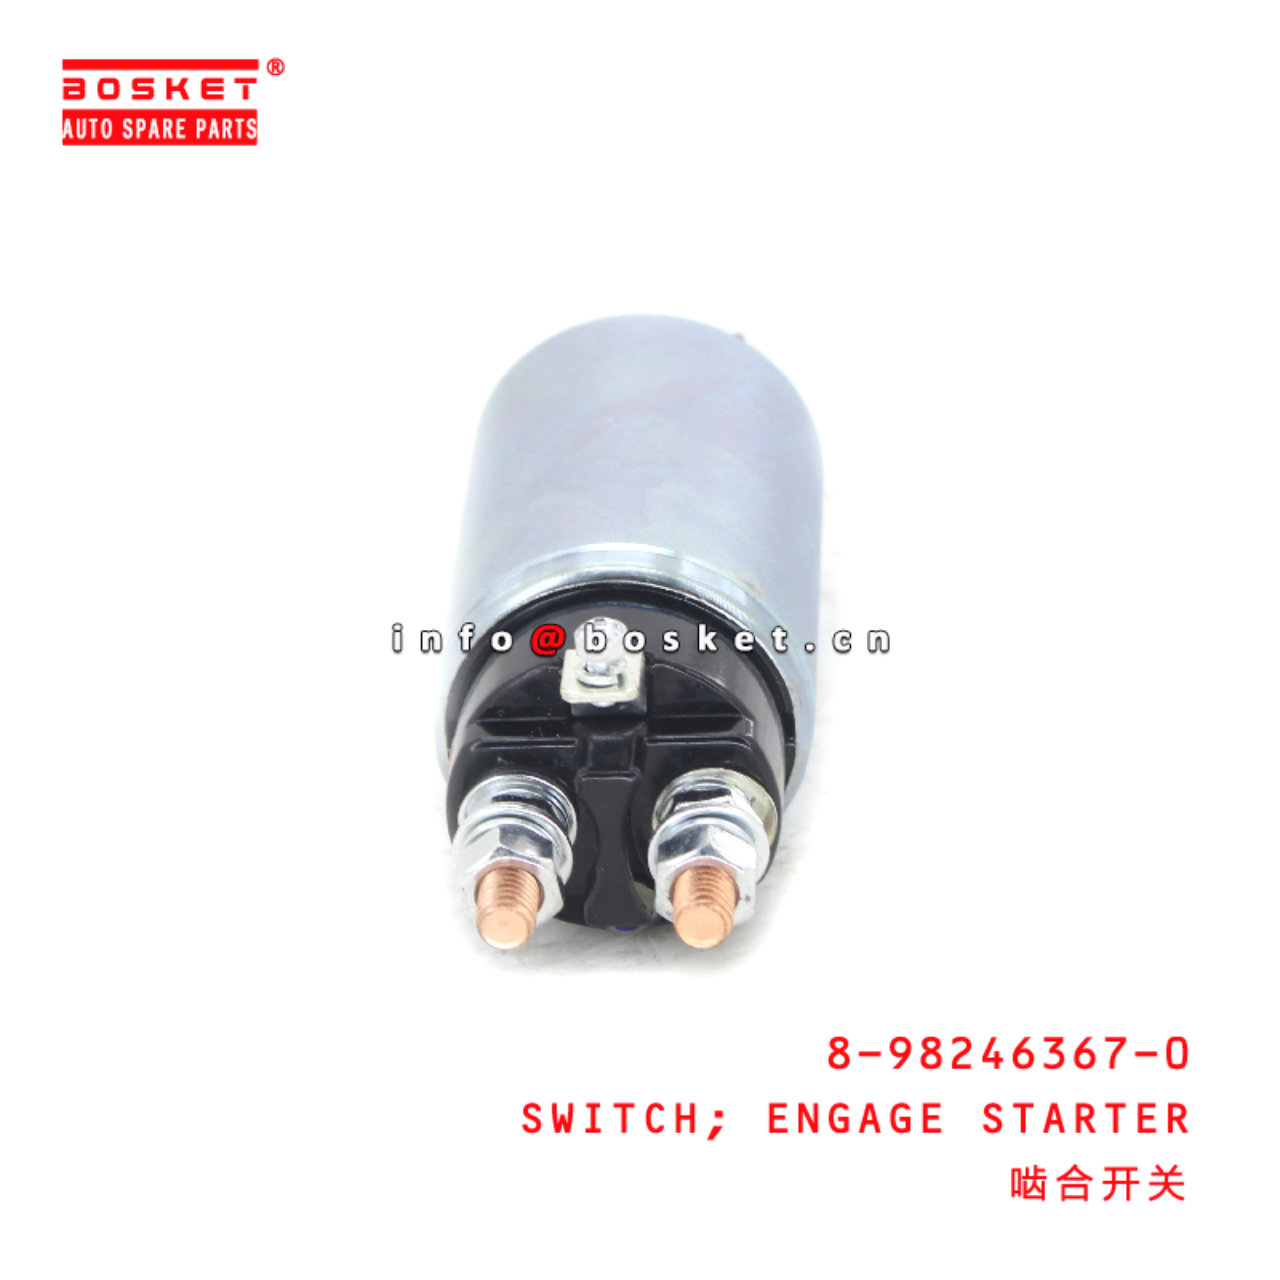 8-98246367-0 Engage Starter Switch suitable for ISUZU 700P 4HK1 8982463670